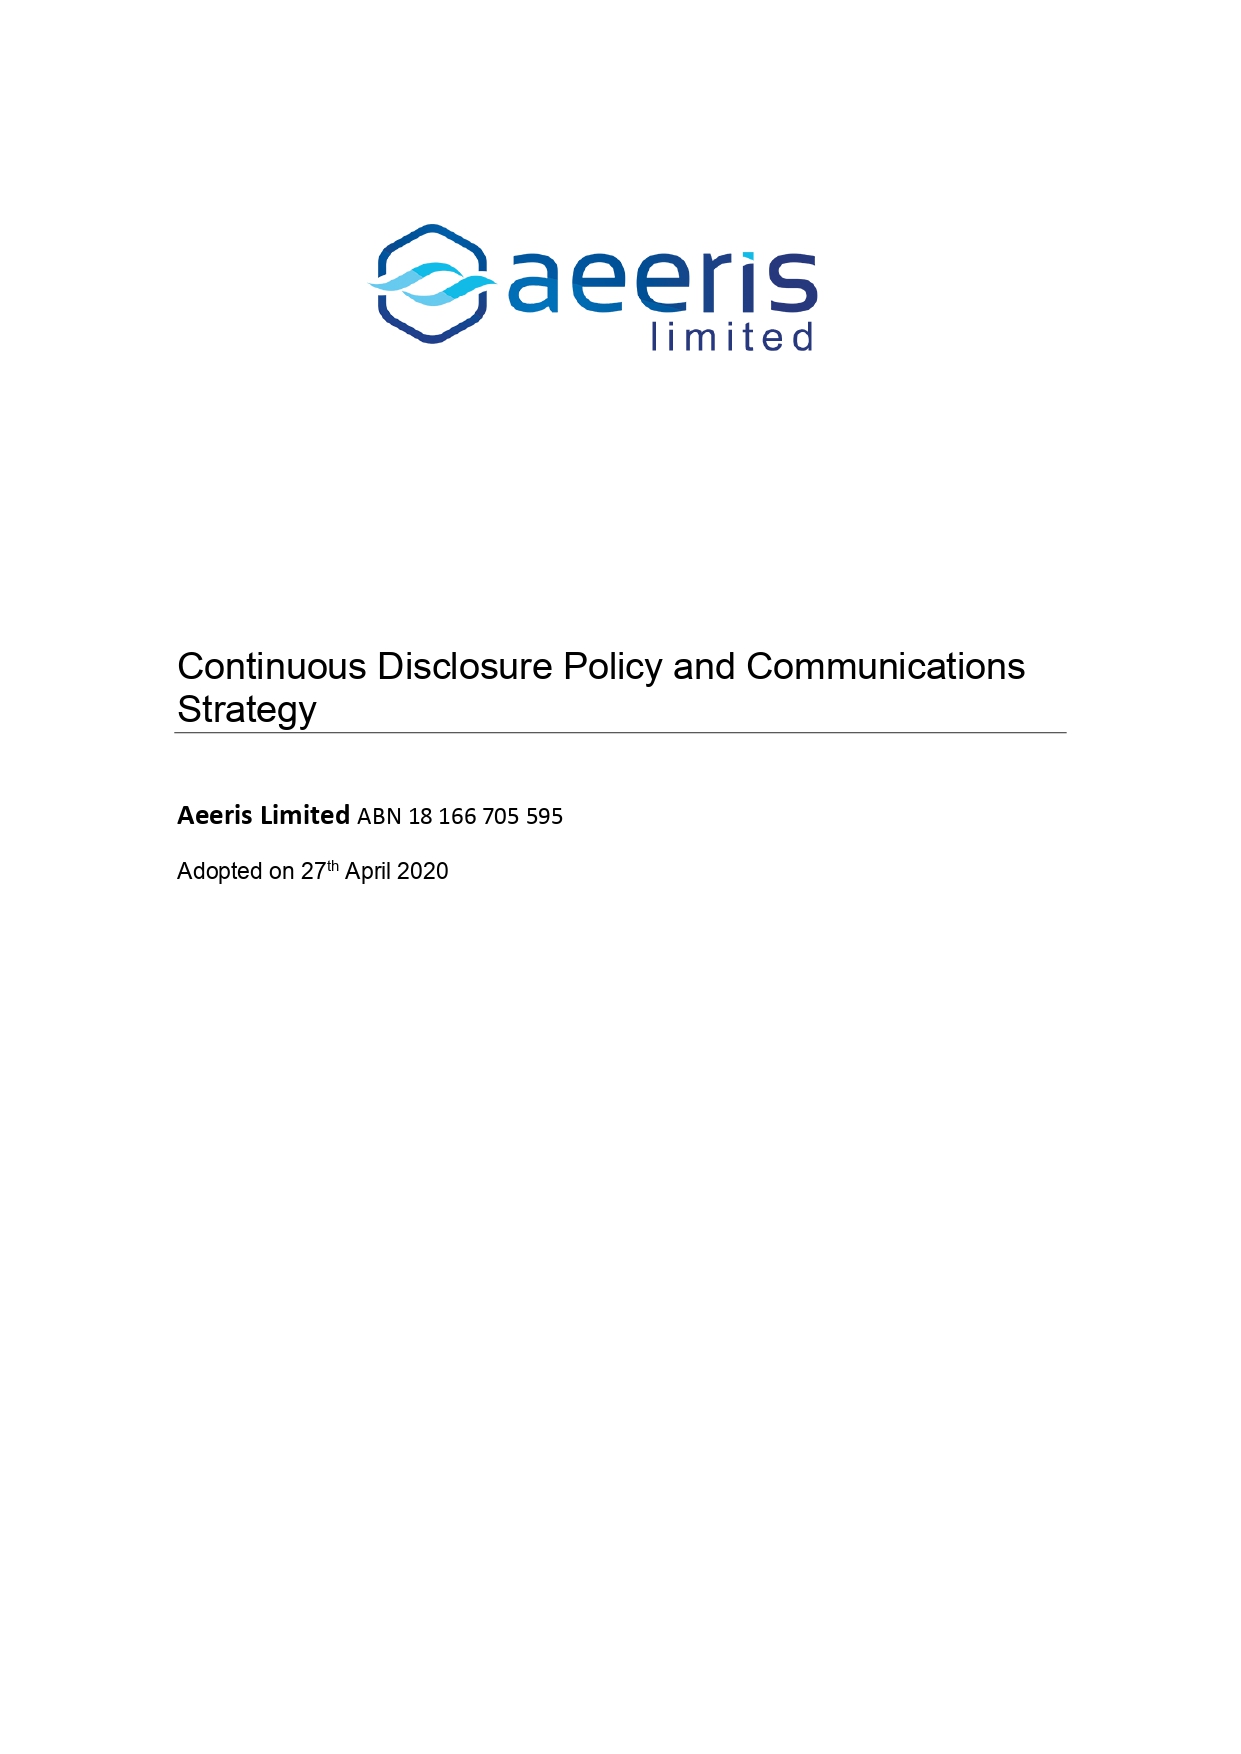 AER Continuous Disclosure Policy and Communications Strategy